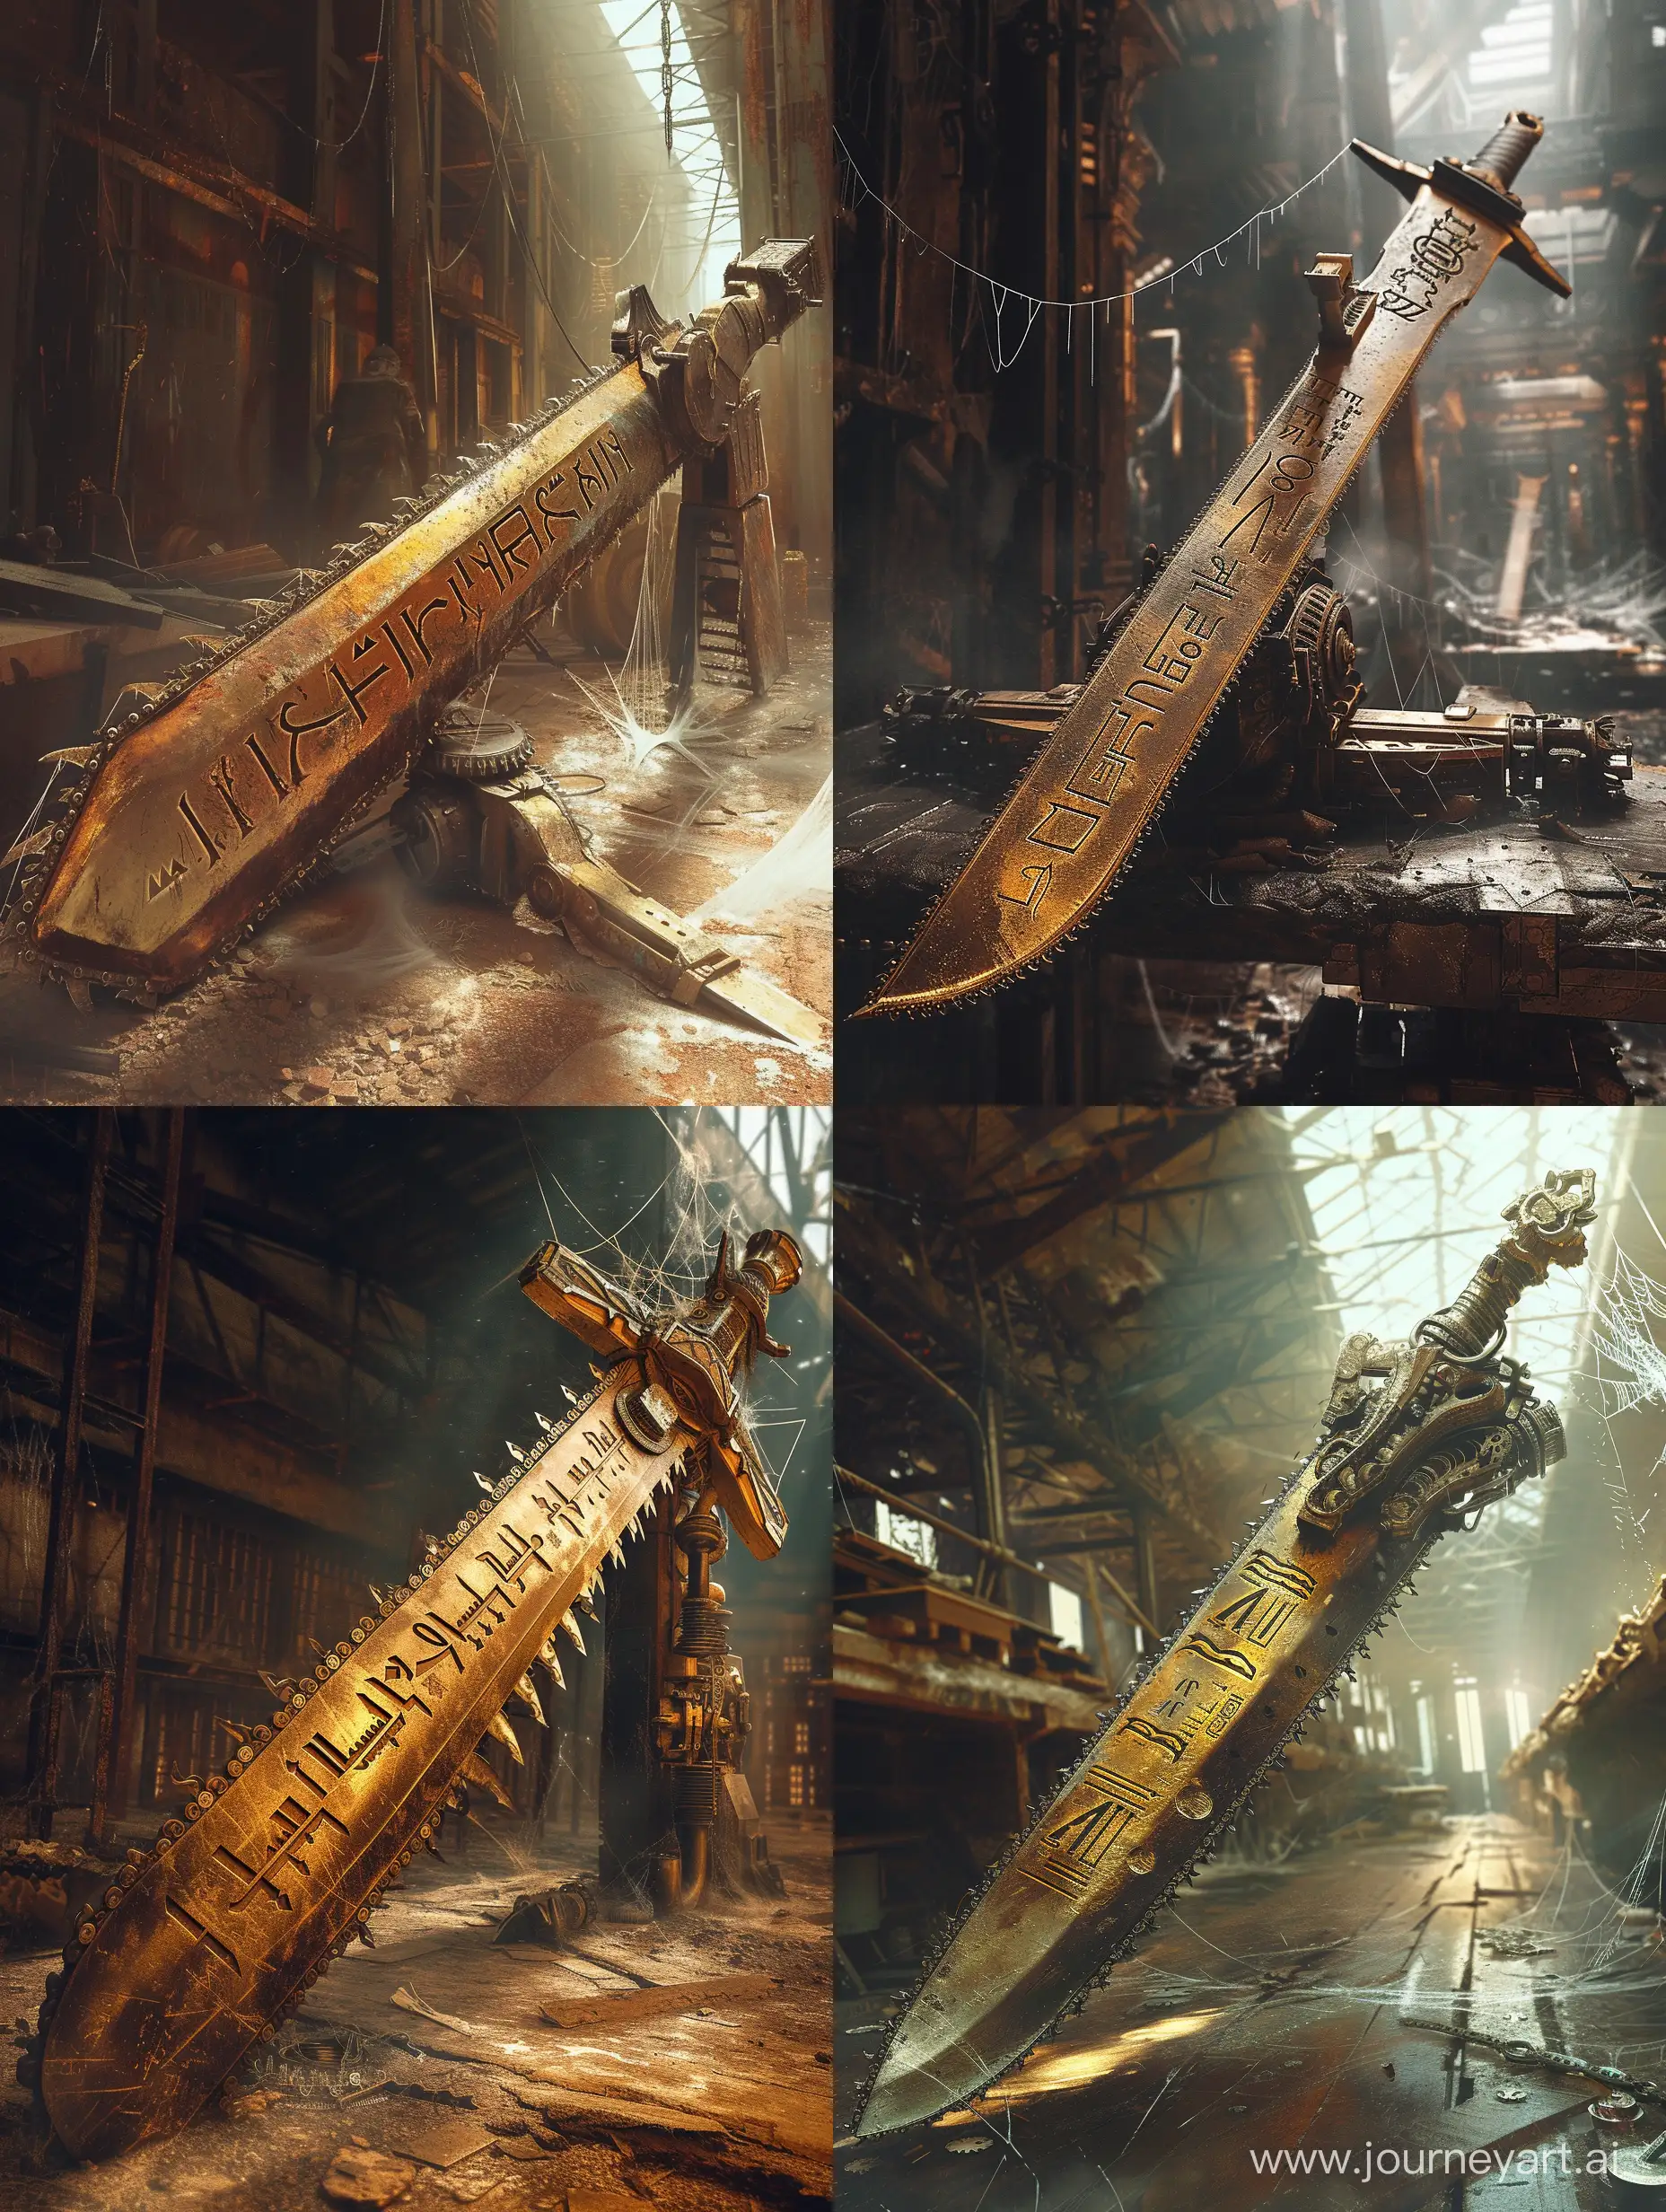 persian sword with engine,with chainsaw blades,cuneiform letters curving on it,intricate,Inside an old warehouse, cobwebs on it,steampunk.incredible detail,warm light,terrifying.